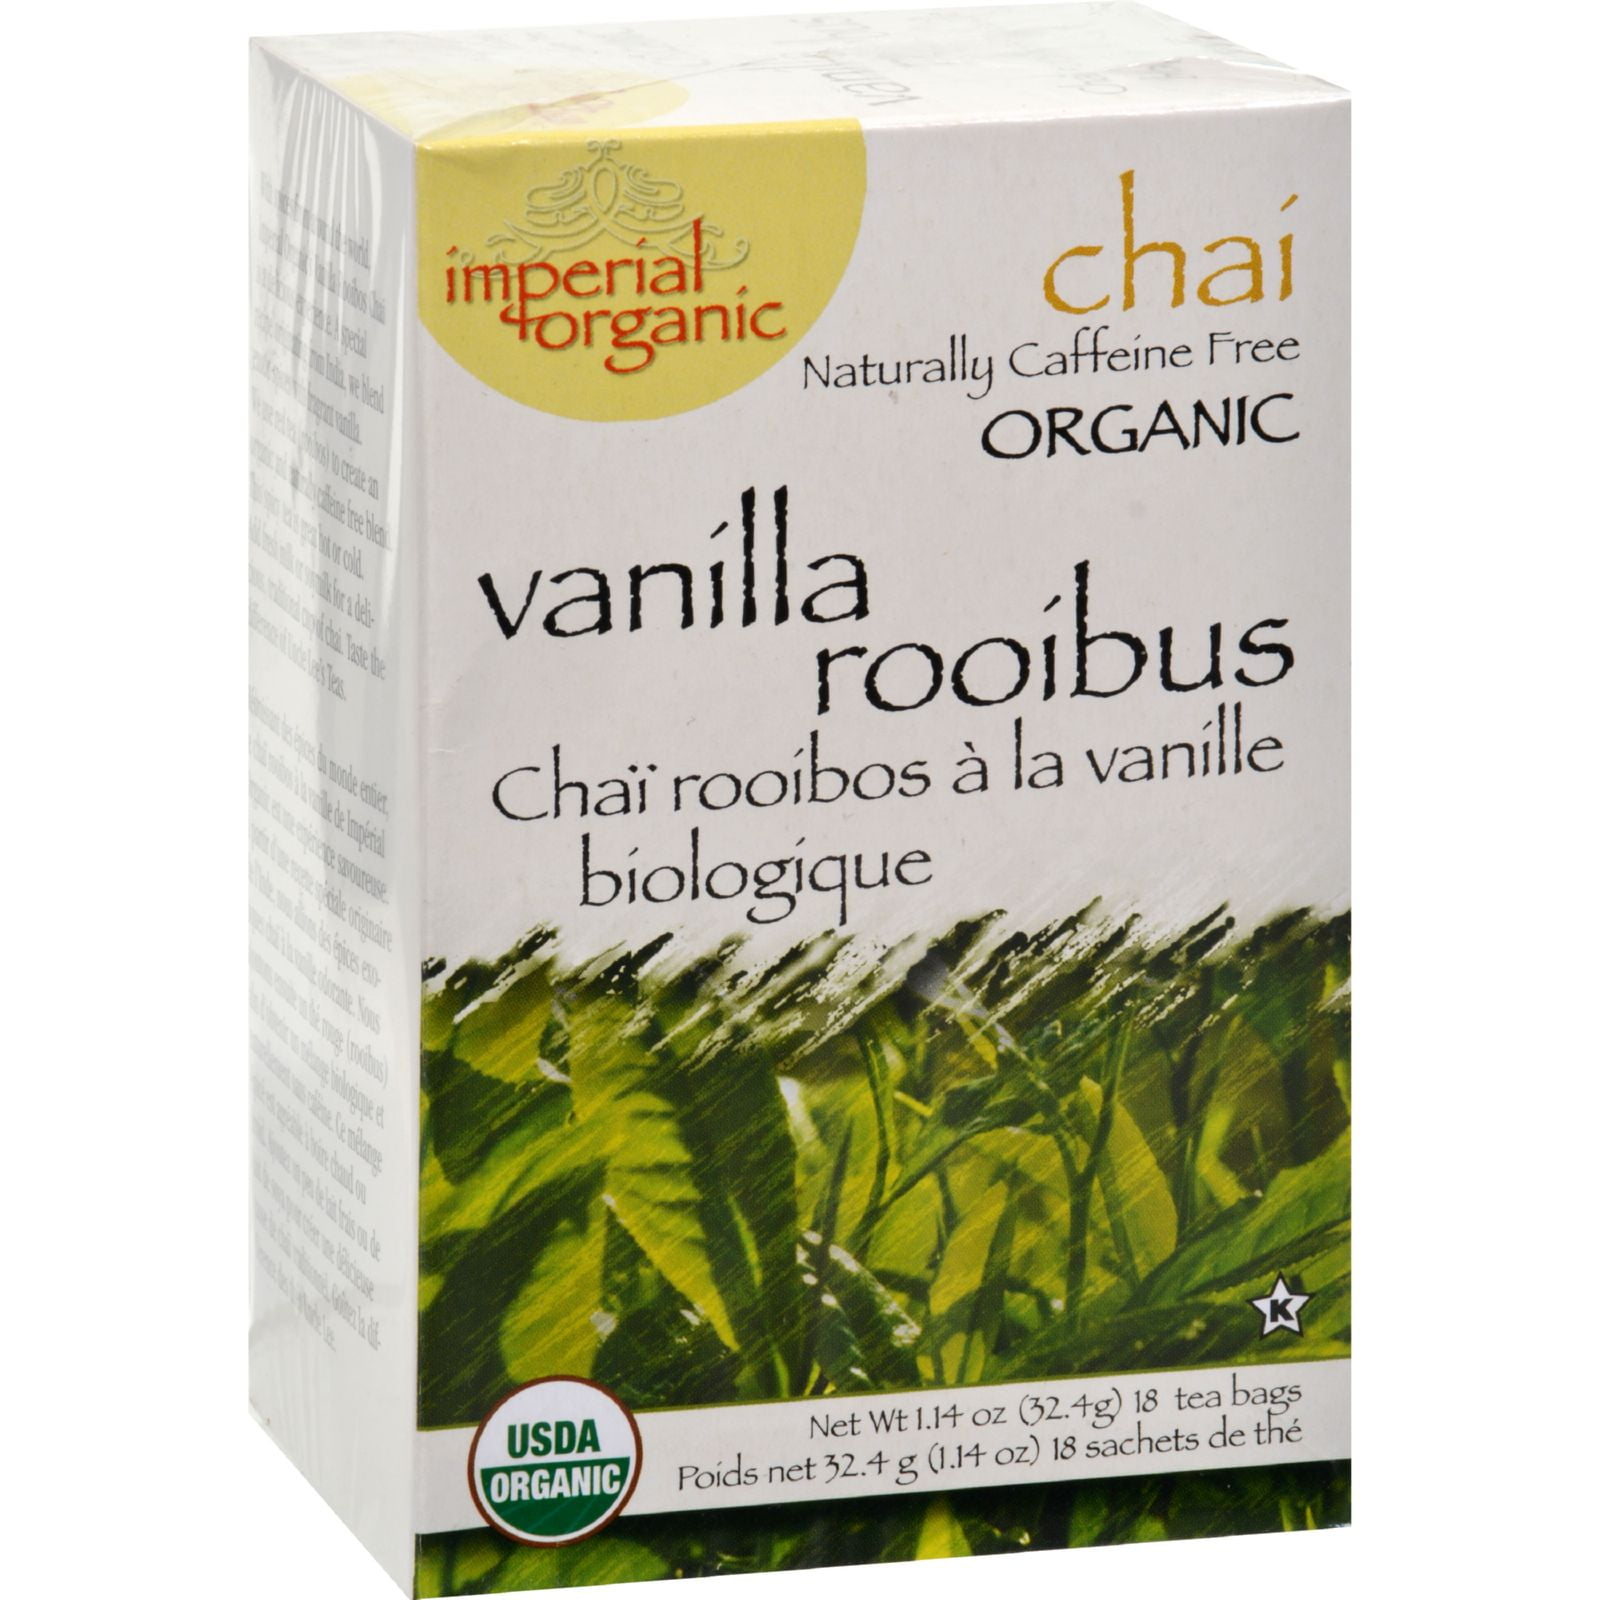 18-Count Uncle Lees Imperial Organic Tea Chai  With Orange Ginger Rooibos Pack of 4